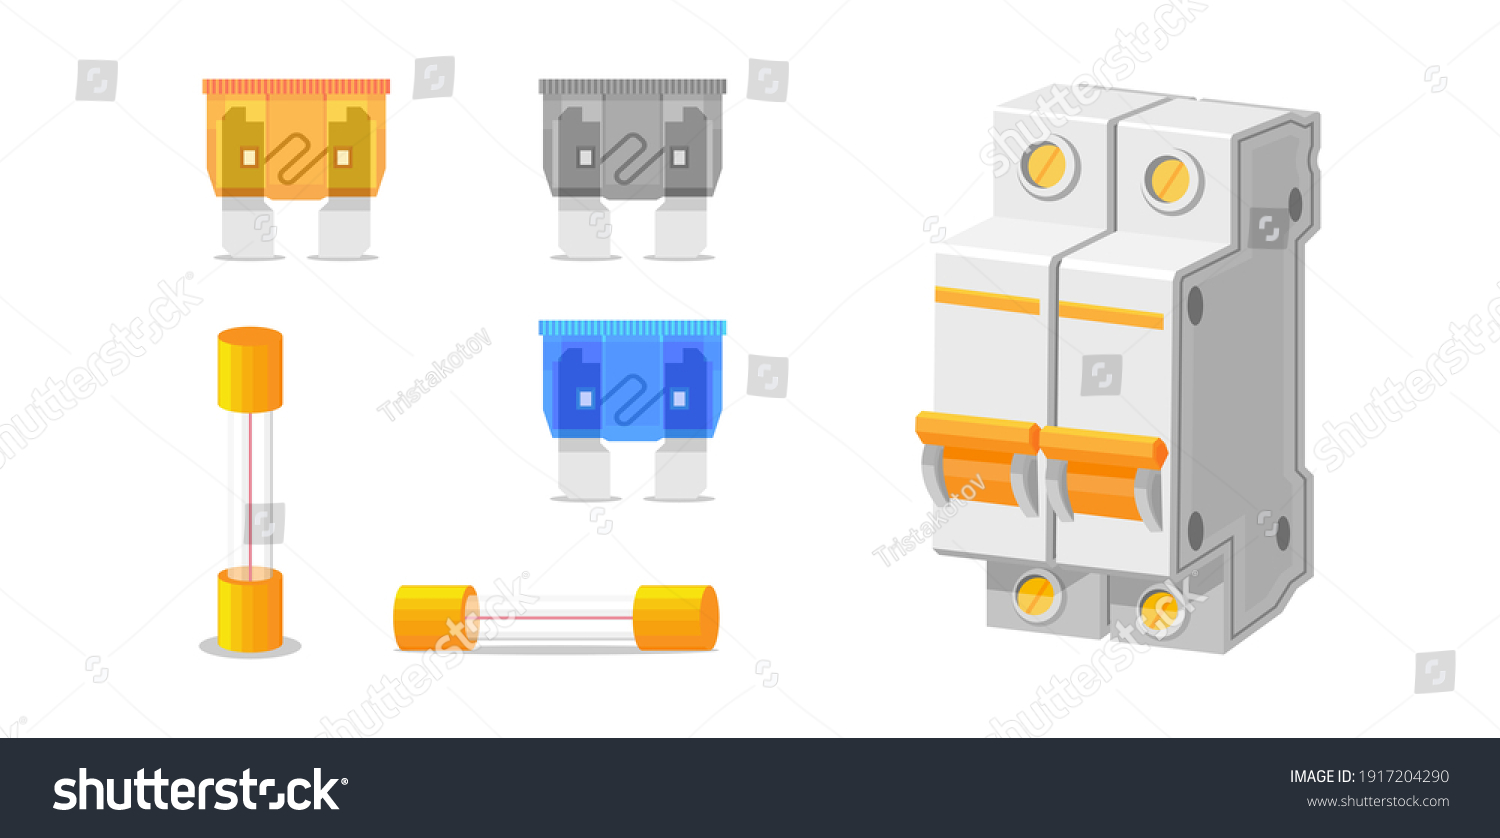 SVG of Types of fuses and components of electrical protection. Electrical switches.Isolated on a white background. svg